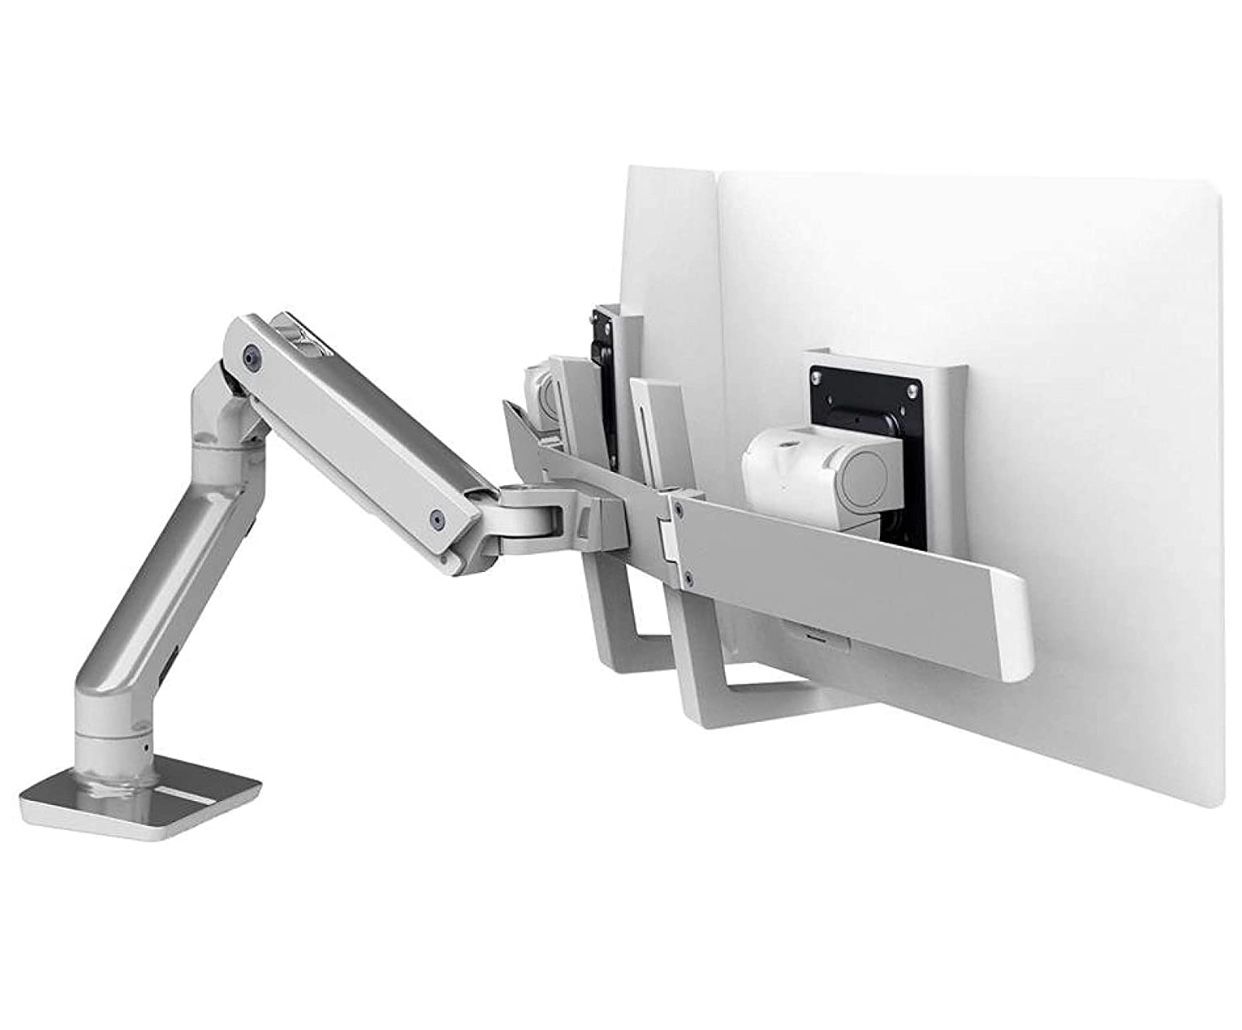 Ergotron – HX Desk Dual Monitor Arm – 24.5-Inch Extension, Polished Aluminum 2 Monitors NEW OPEN BOX Heavy-duty monitor arm lets you easily reposit